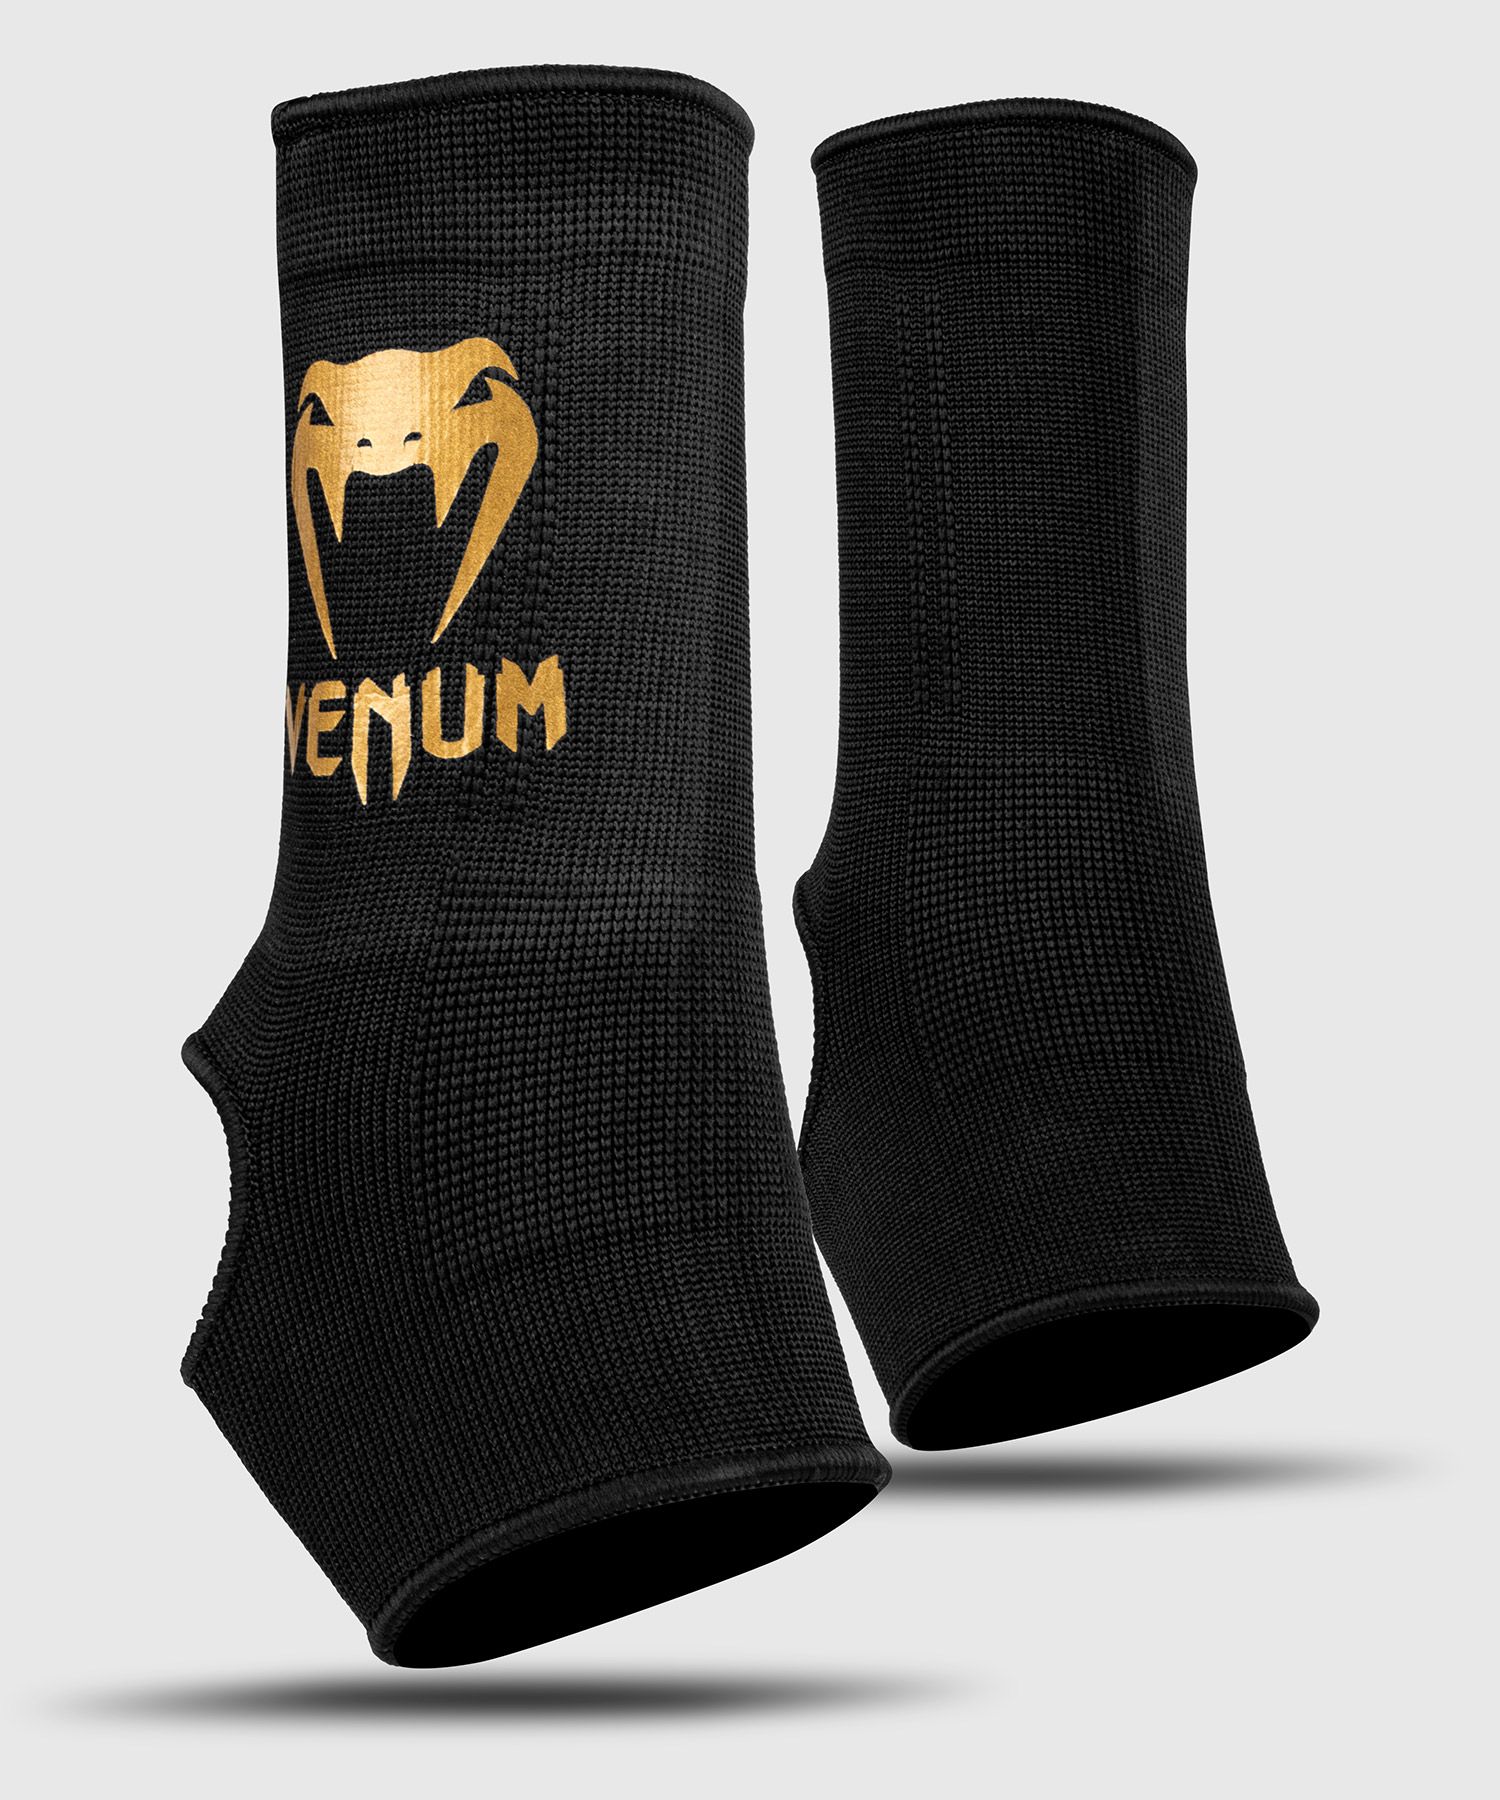 Venum Kontact Ankle Support Guard